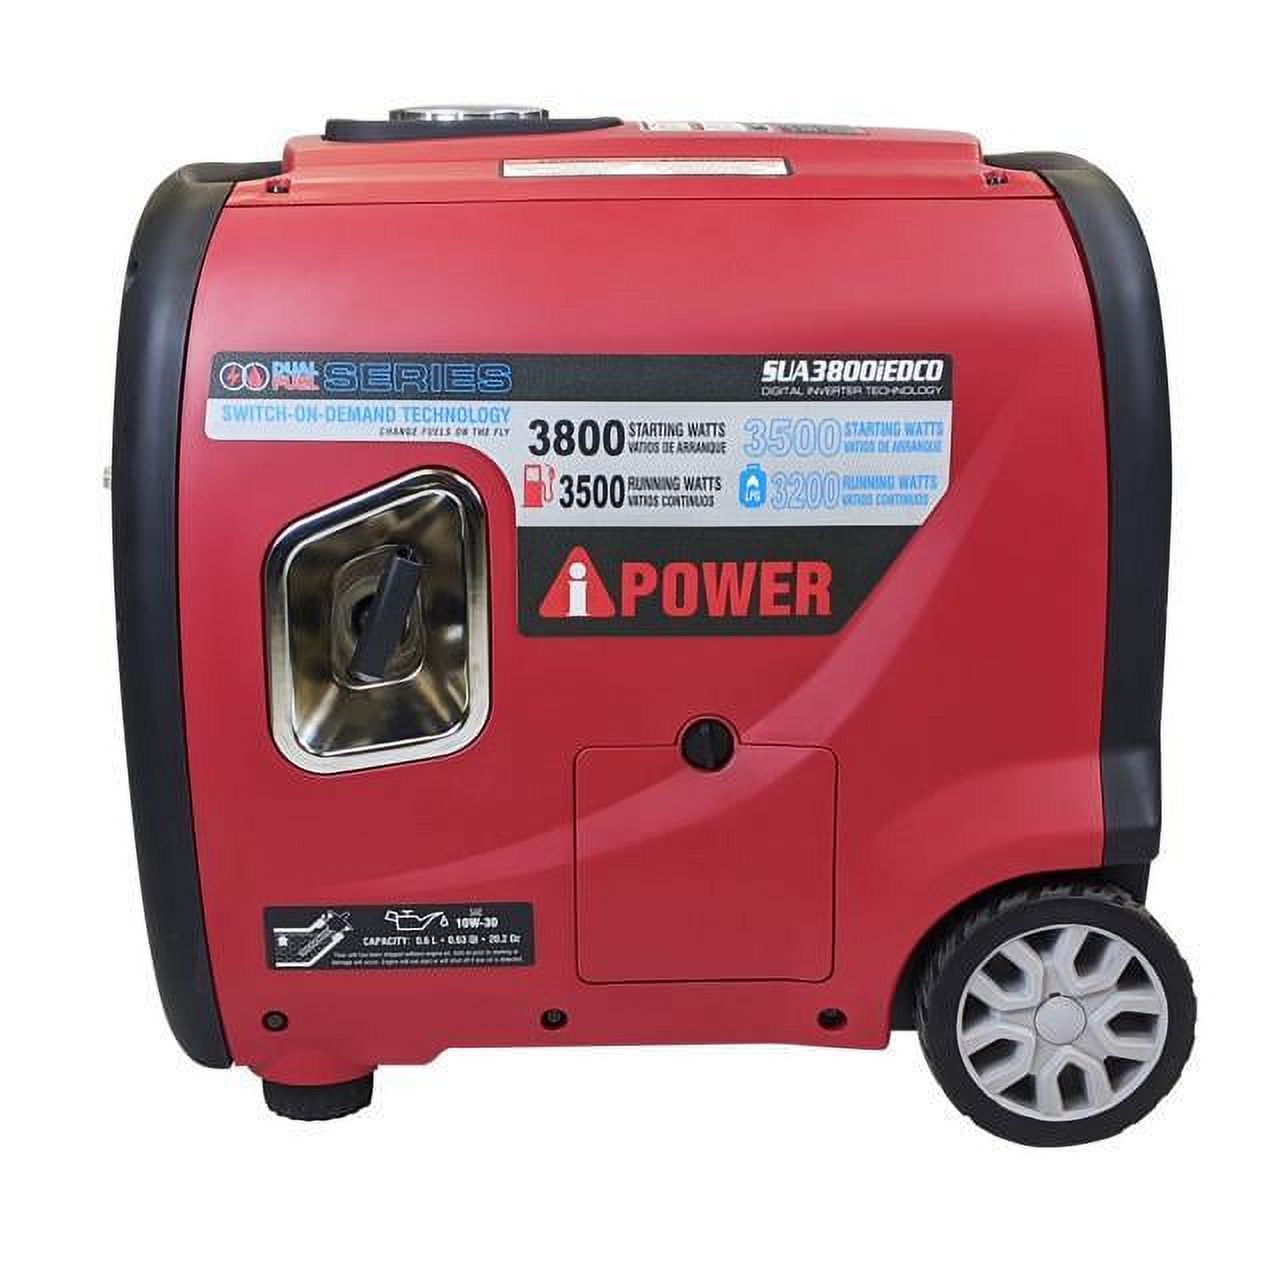 A-IPOWER Dual Fuel Generator SUA3800iED - image 2 of 7